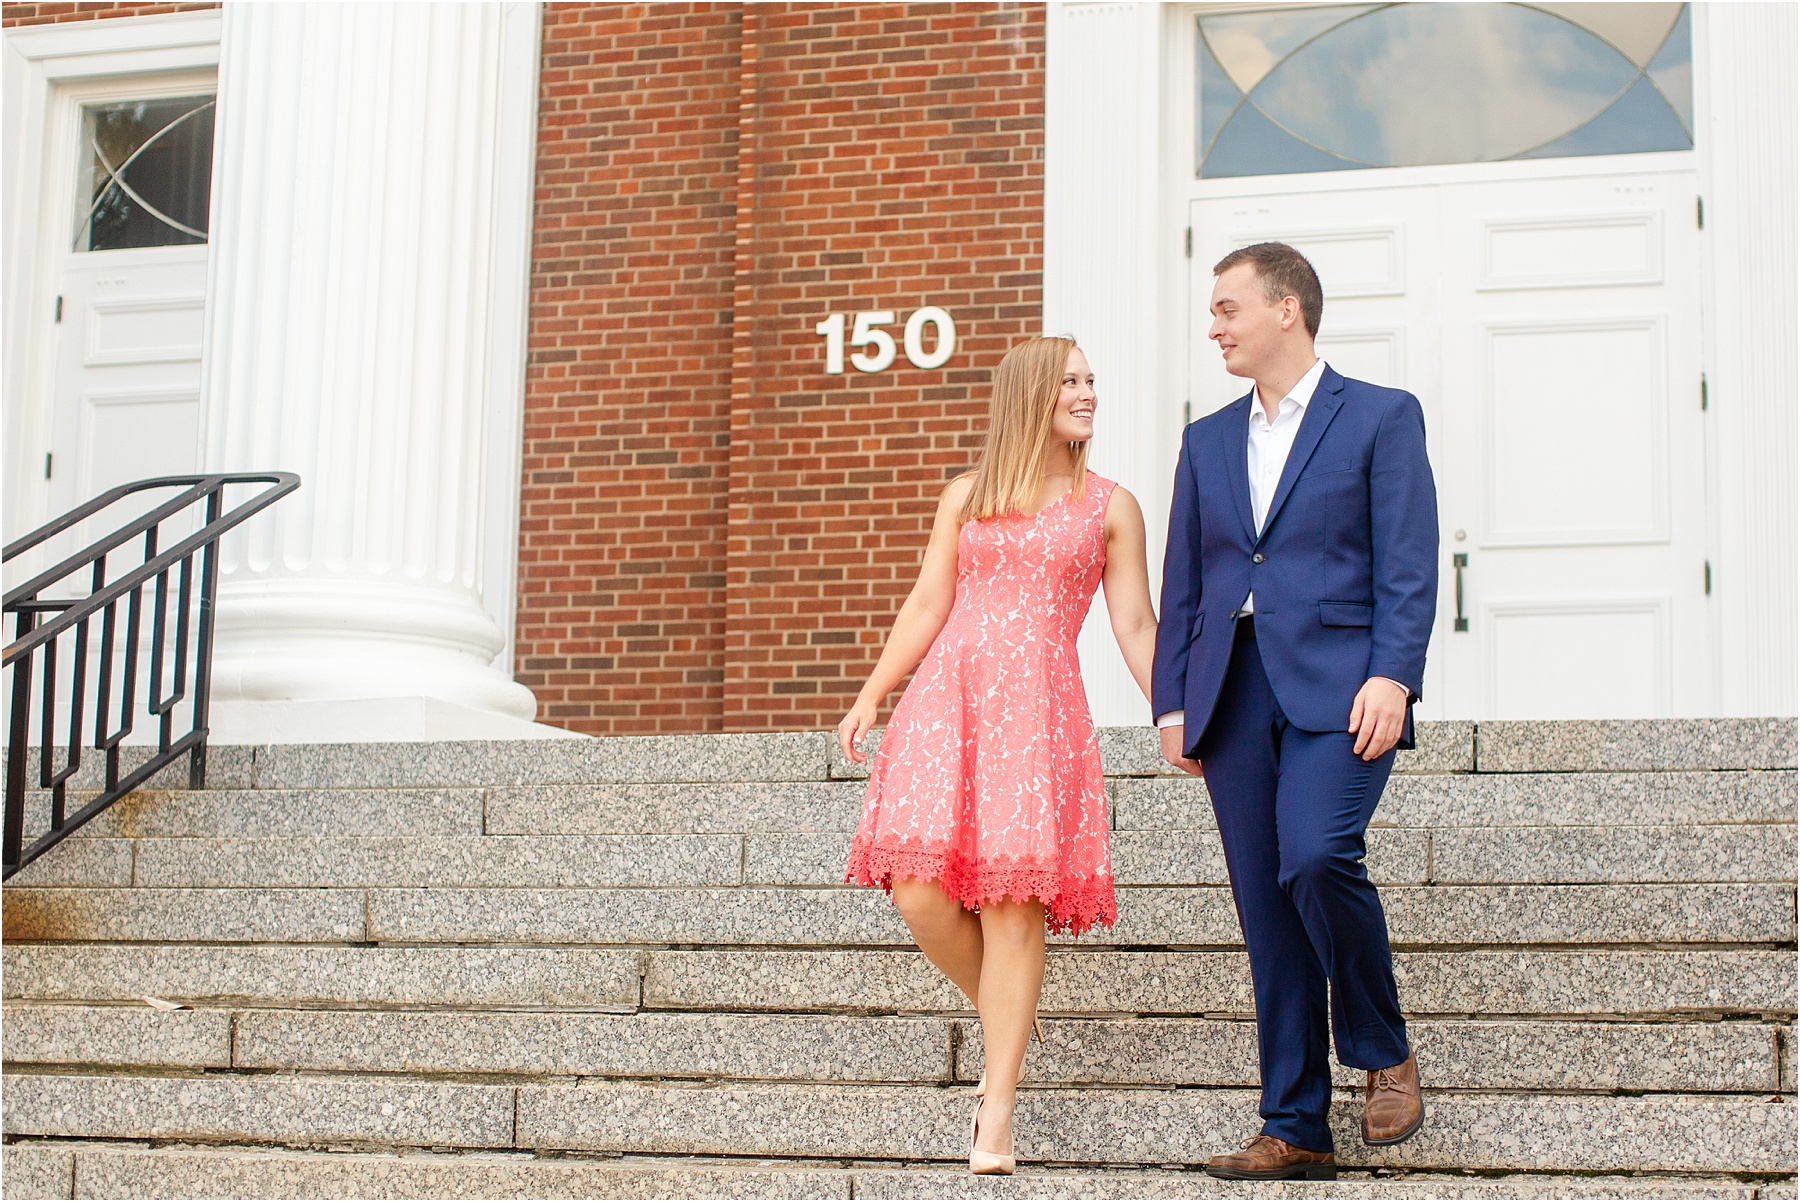 Engaged couple taking pictures on Kentucky church steps